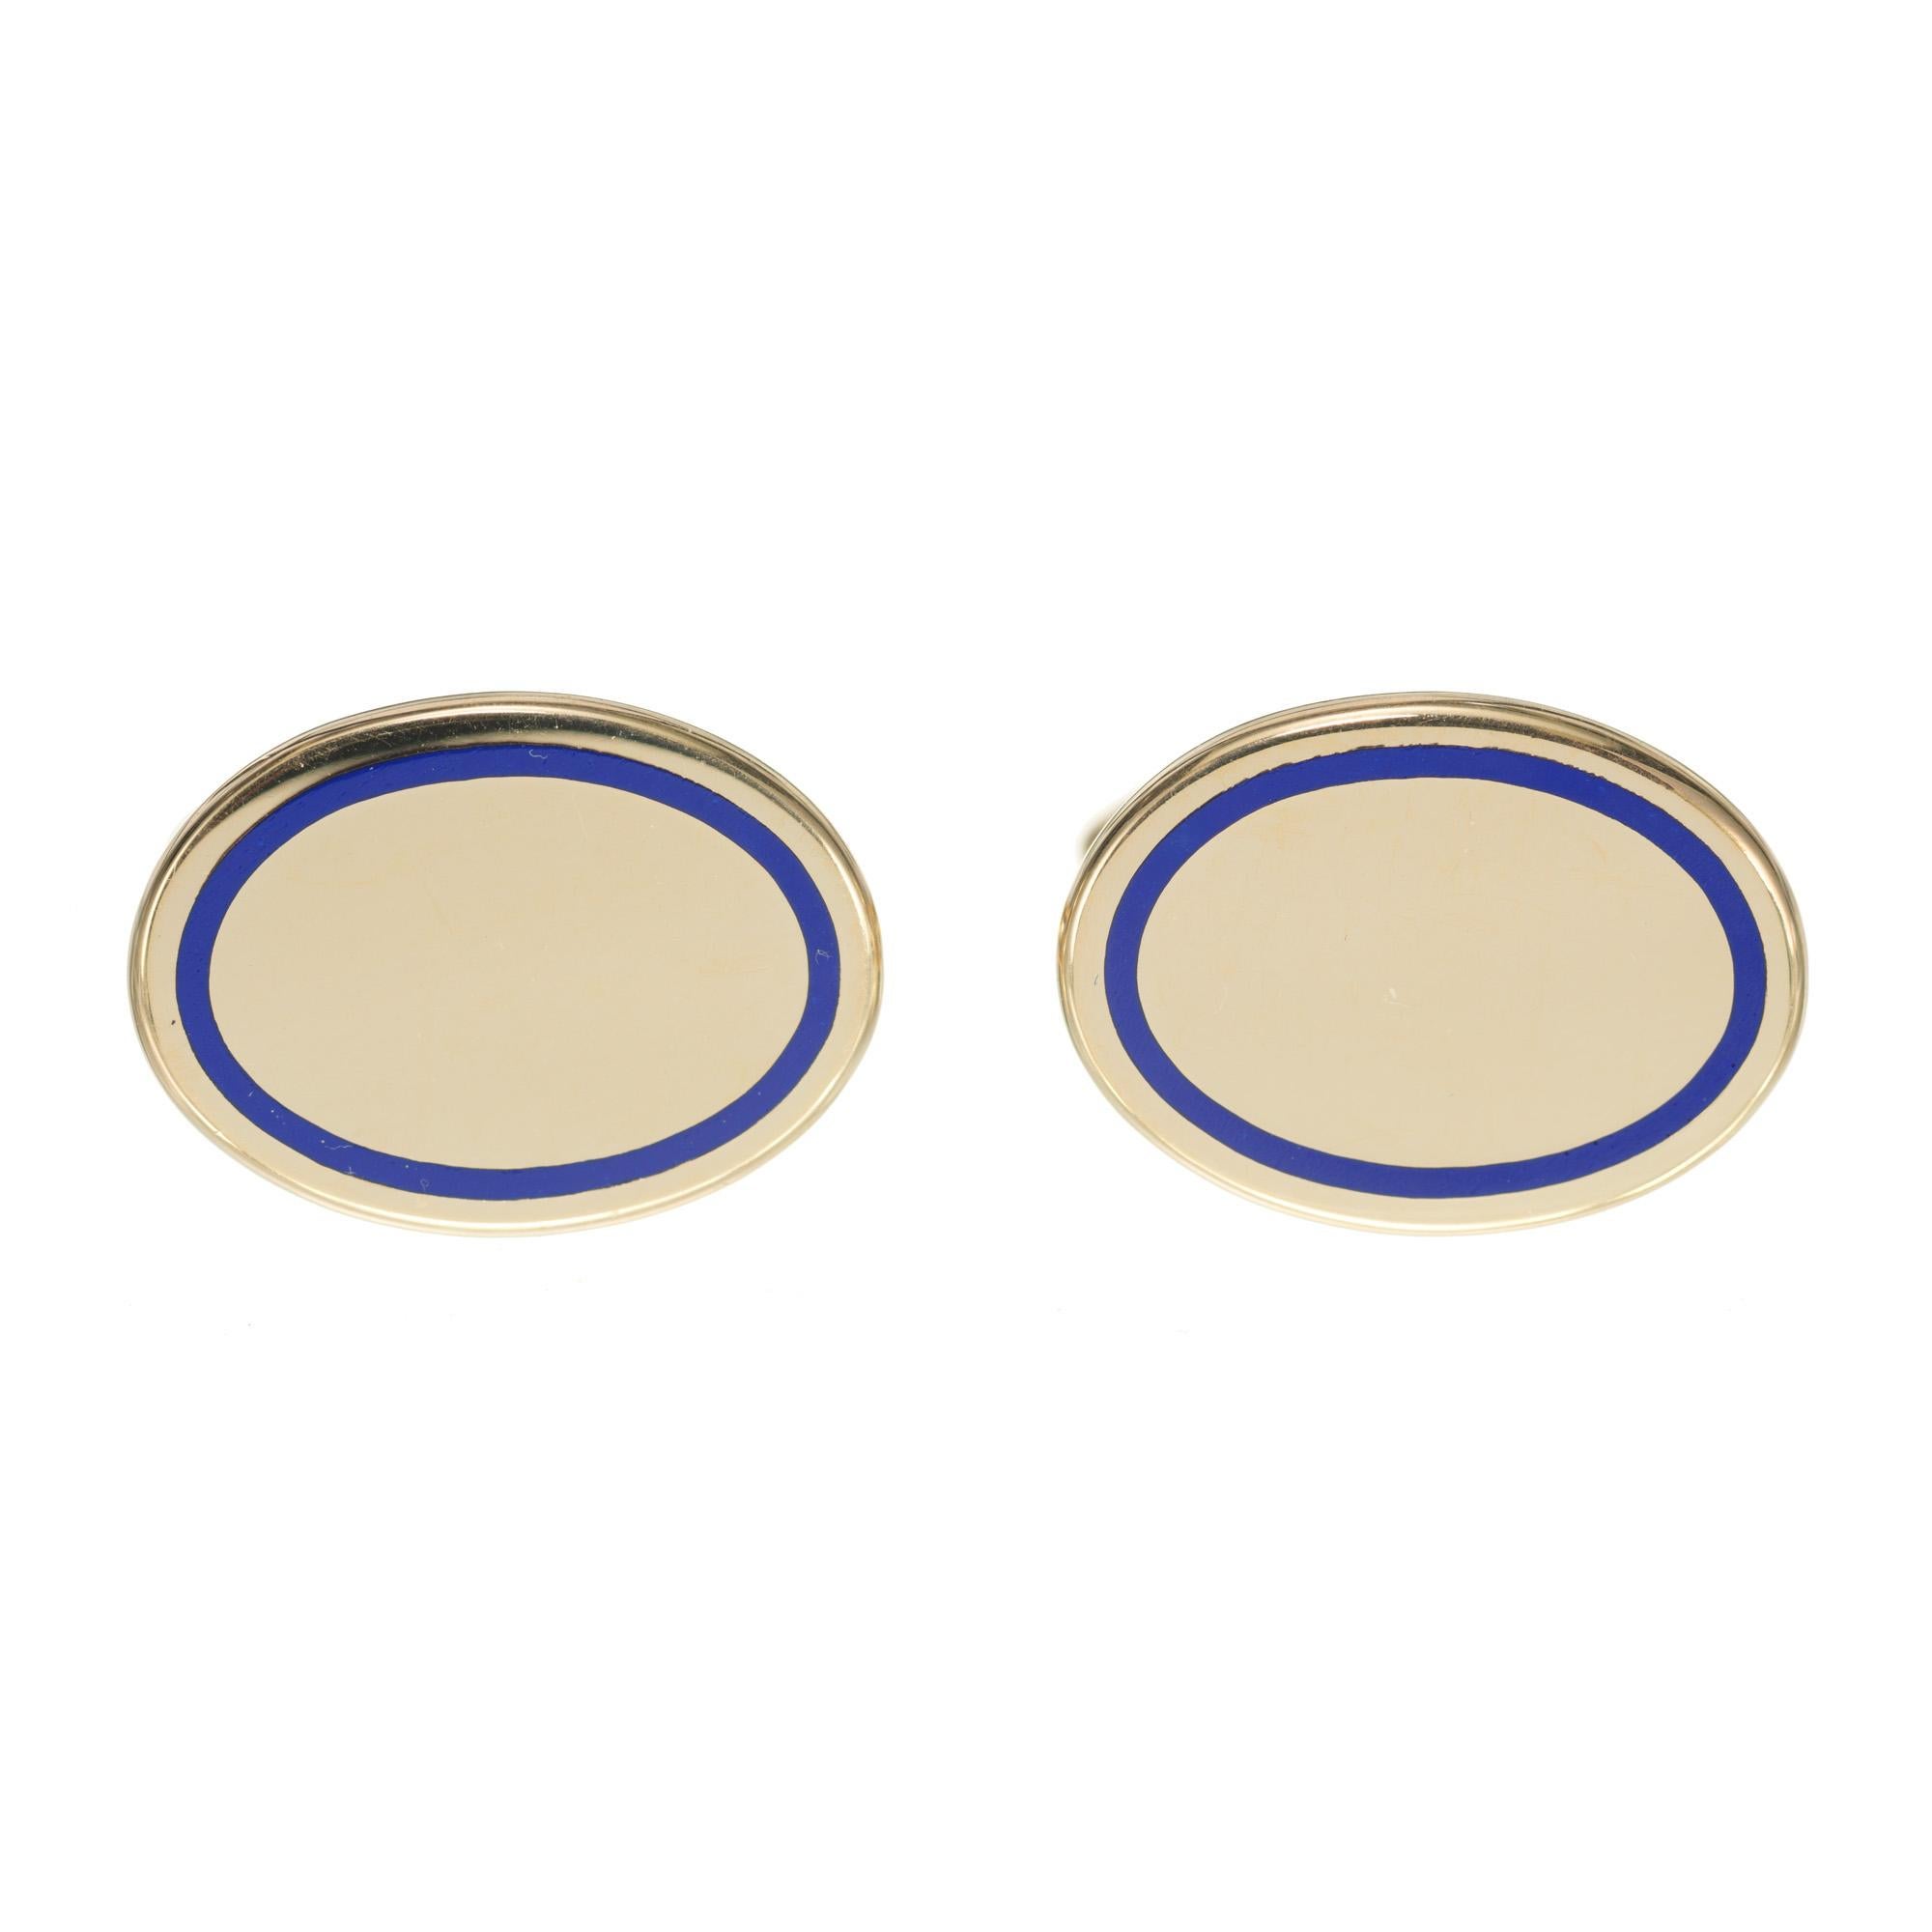 1960's 14k yellow gold cufflinks. Oval shaped, each with a blue oval enamel rim. 

14k yellow gold 
Stamped: 14k
15.7 grams
Top to bottom: 16.4mm or 5/8 Inches
Width: 22.3mm or 7/8 Inch
Depth or thickness: 1.75mm
